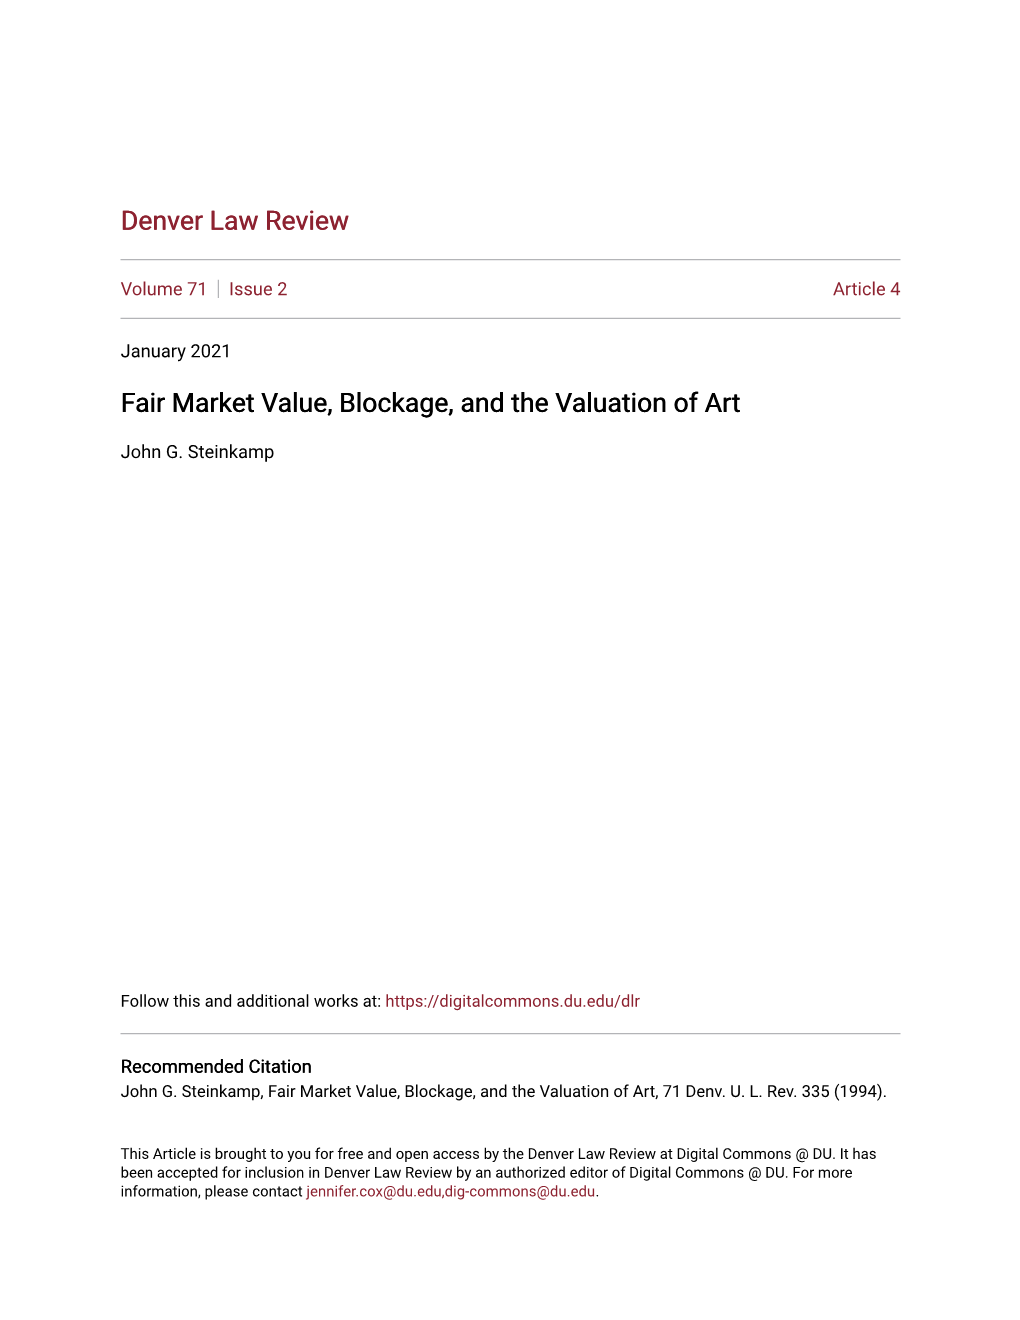 Fair Market Value, Blockage, and the Valuation of Art